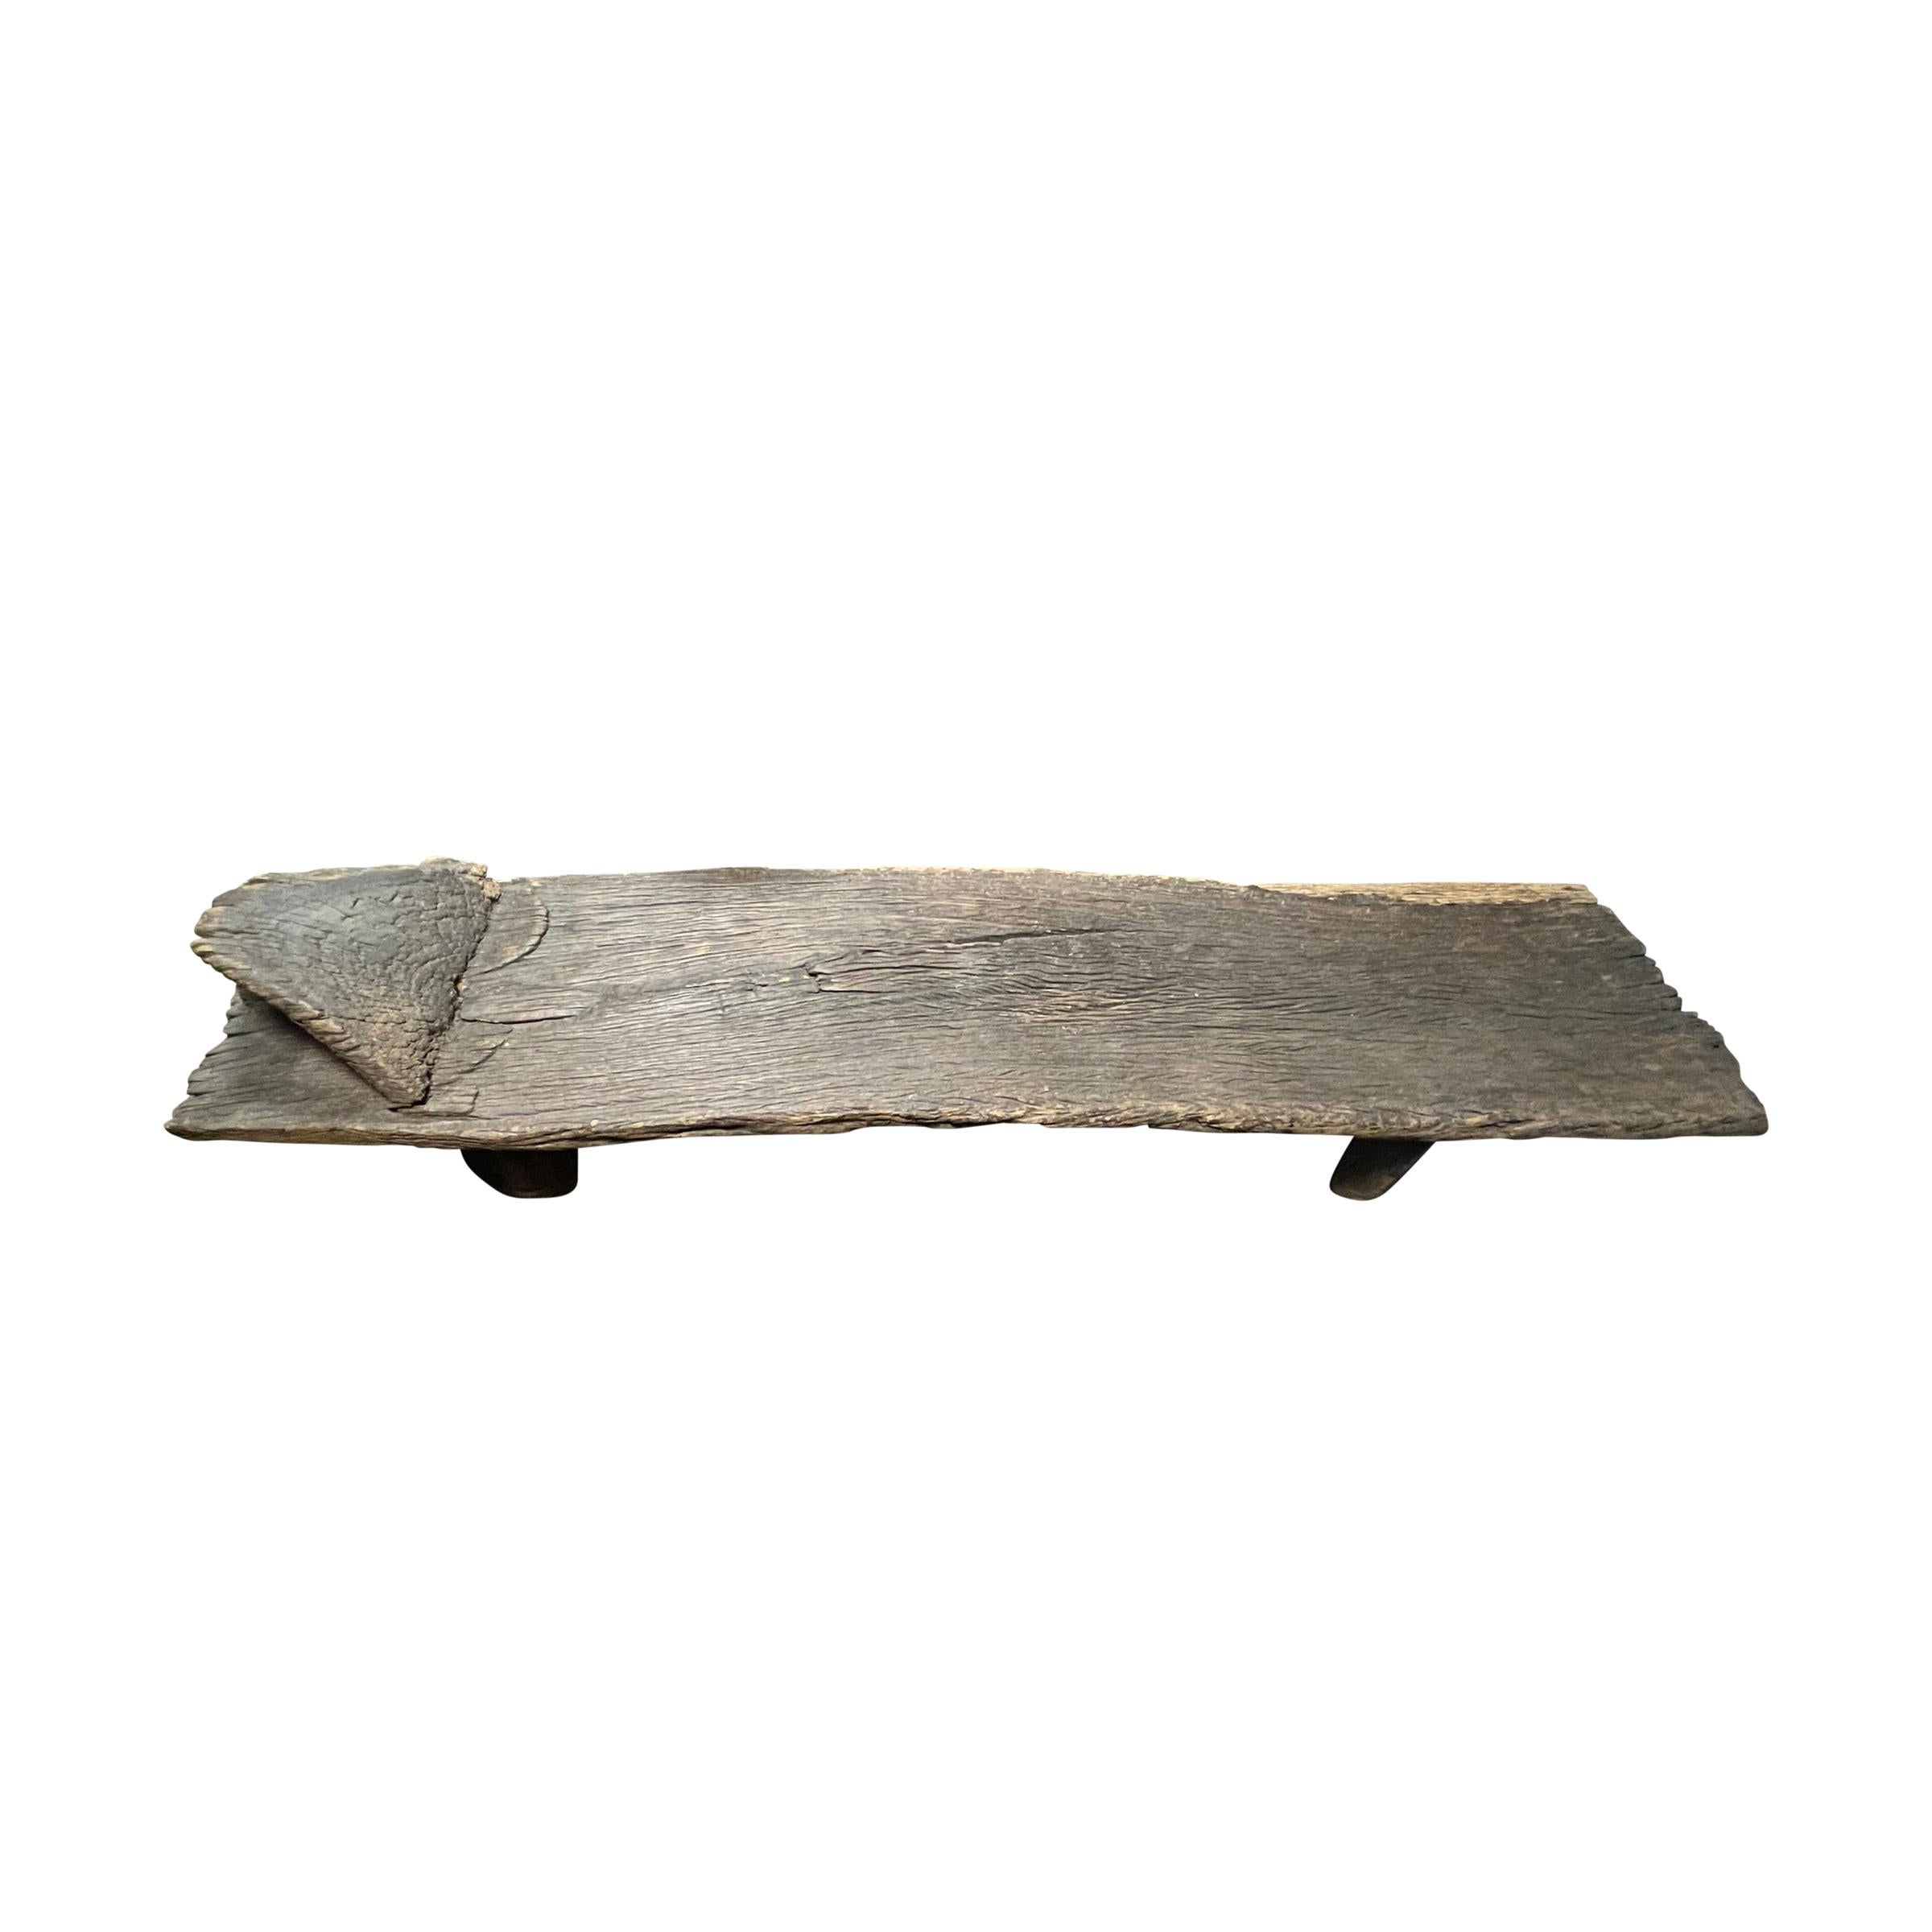 Rustic Exceptional Early 20th Century Senufo Low Table For Sale